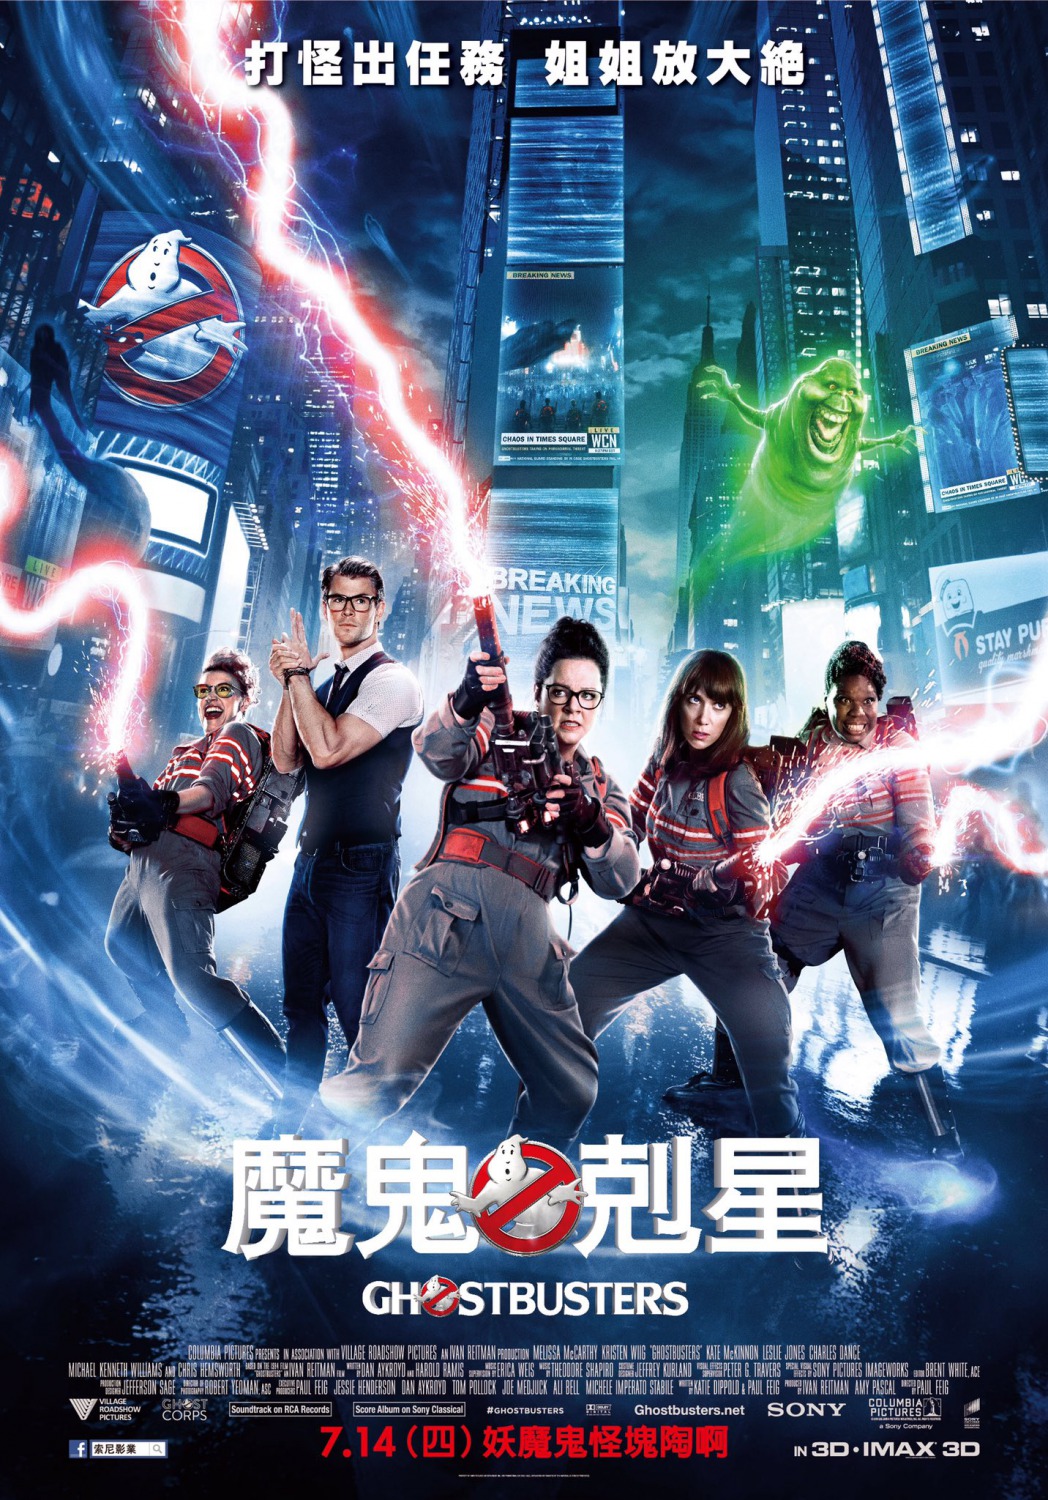 Extra Large Movie Poster Image for Ghostbusters (#7 of 17)